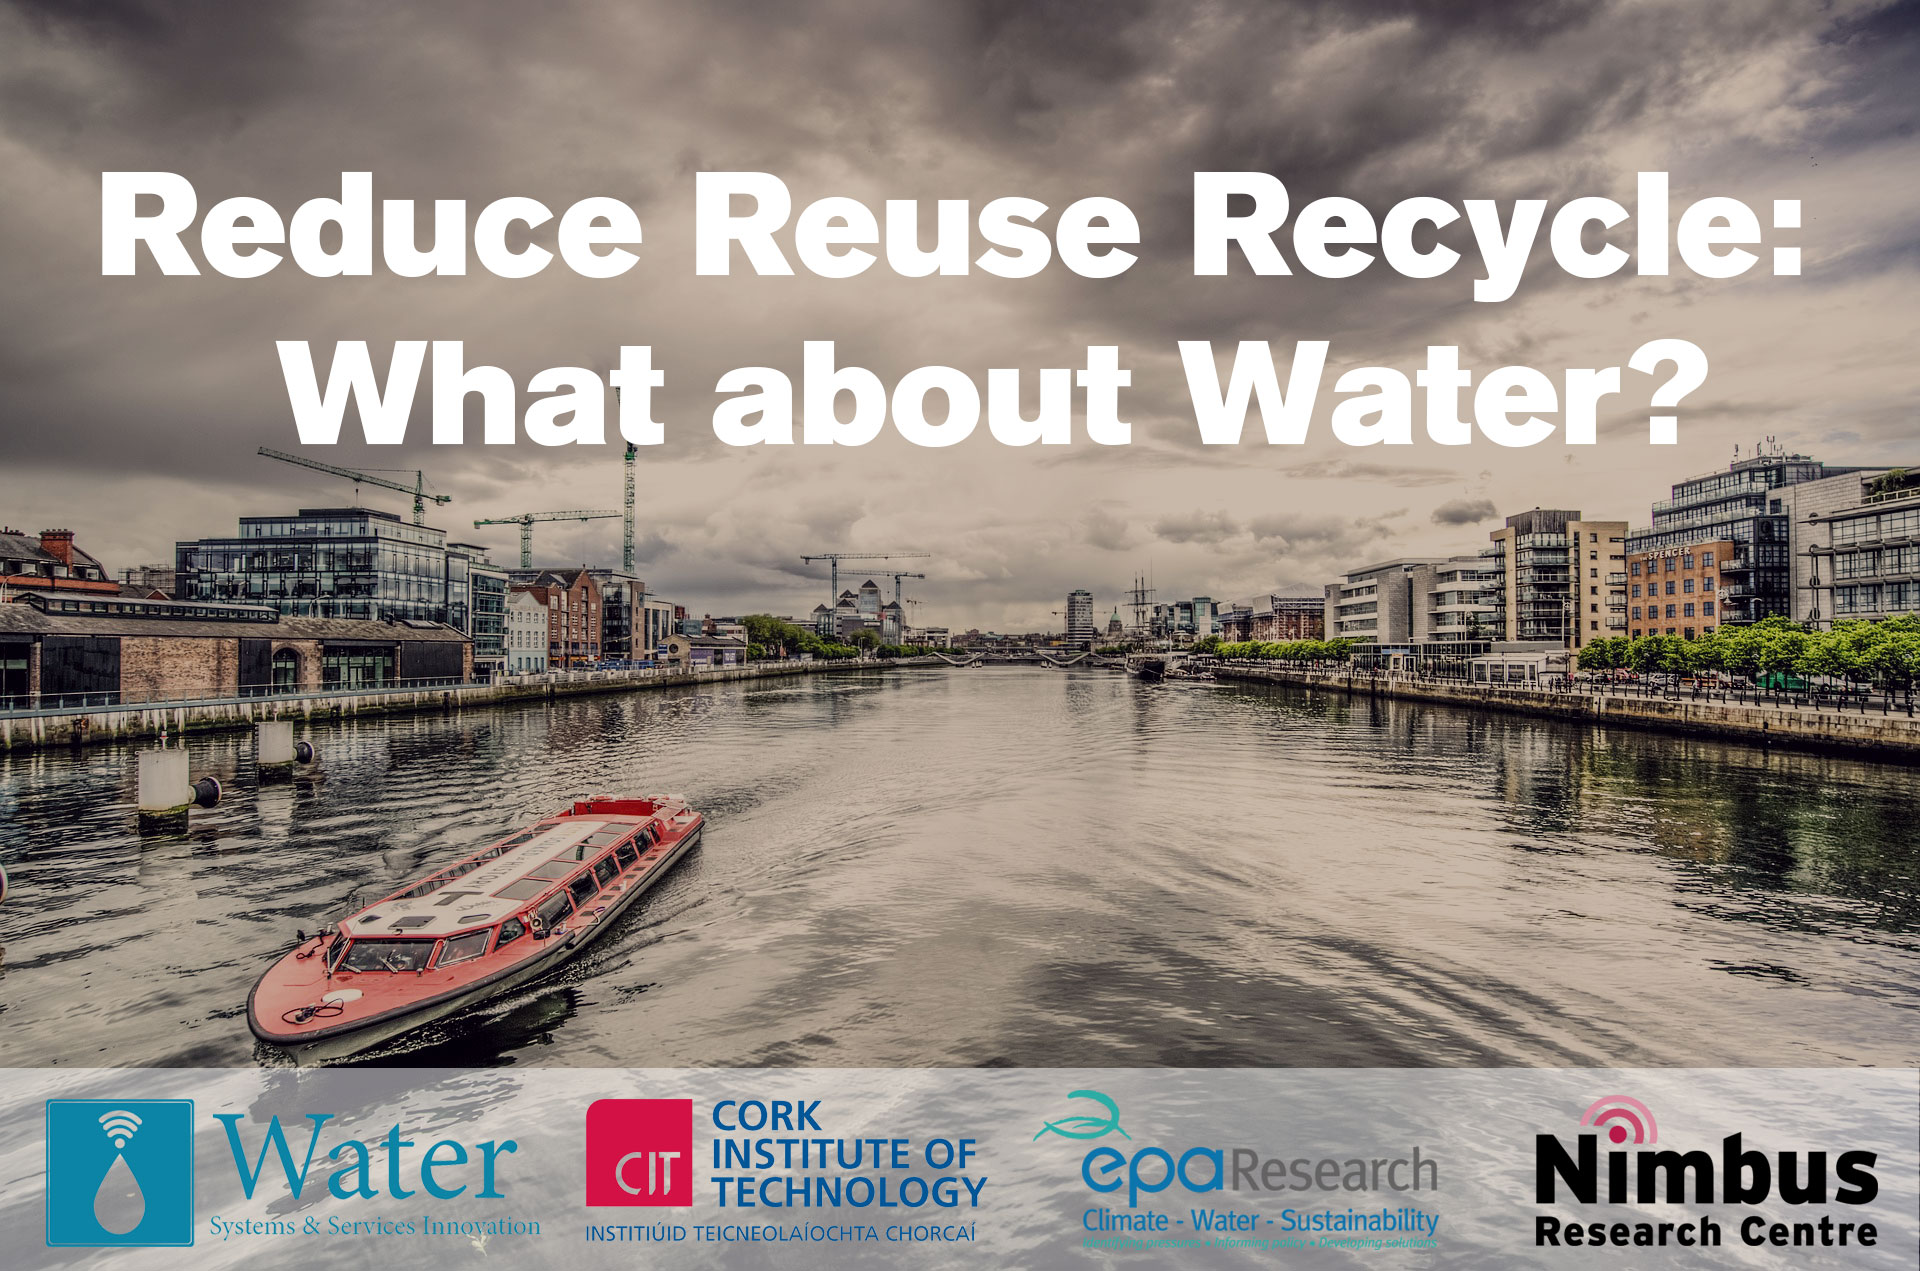 Reduce Reuse Recycle - What about Water